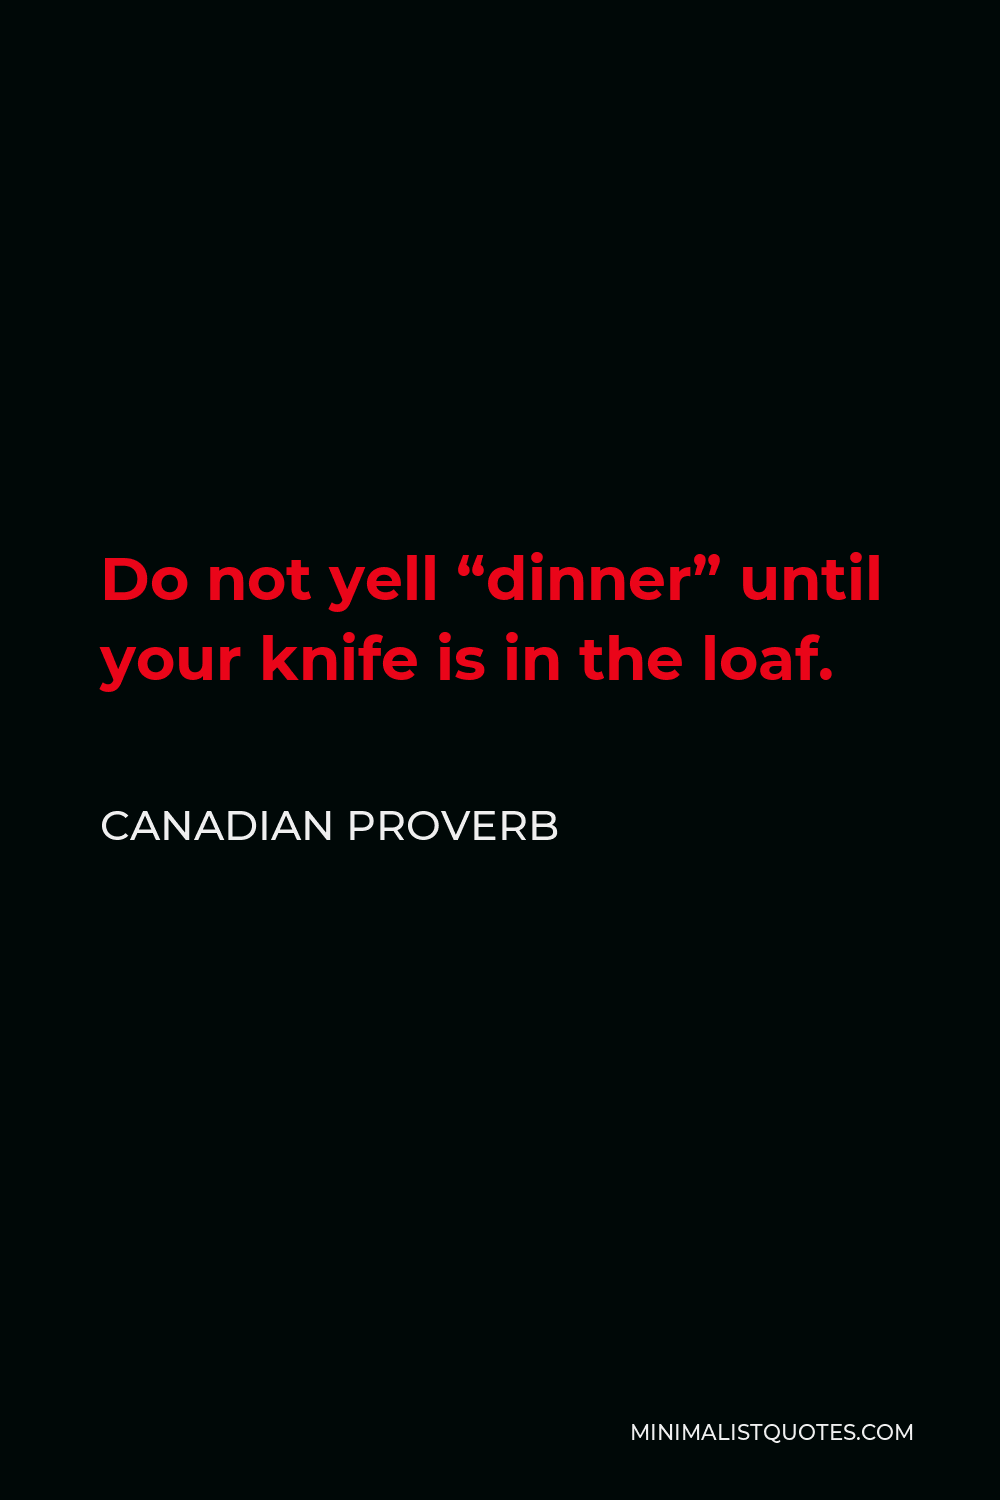 Canadian Proverb Quote - Do not yell “dinner” until your knife is in the loaf.